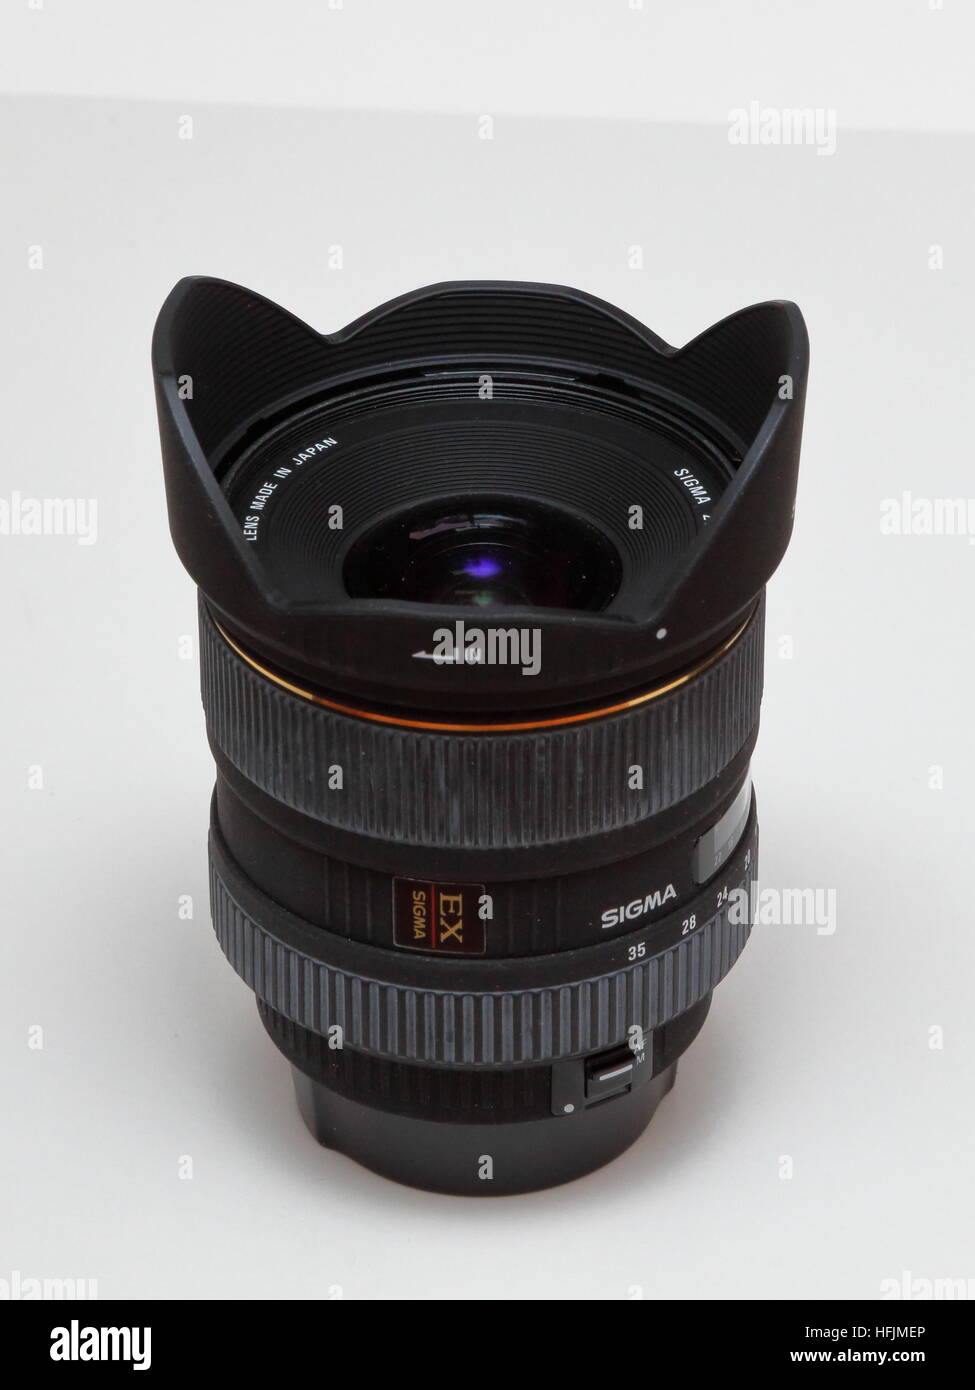 Sigma 17-35mm wide angle zoom lens for SLR / DSLR cameras. Canon EOS fitting  from 1990s Stock Photo - Alamy